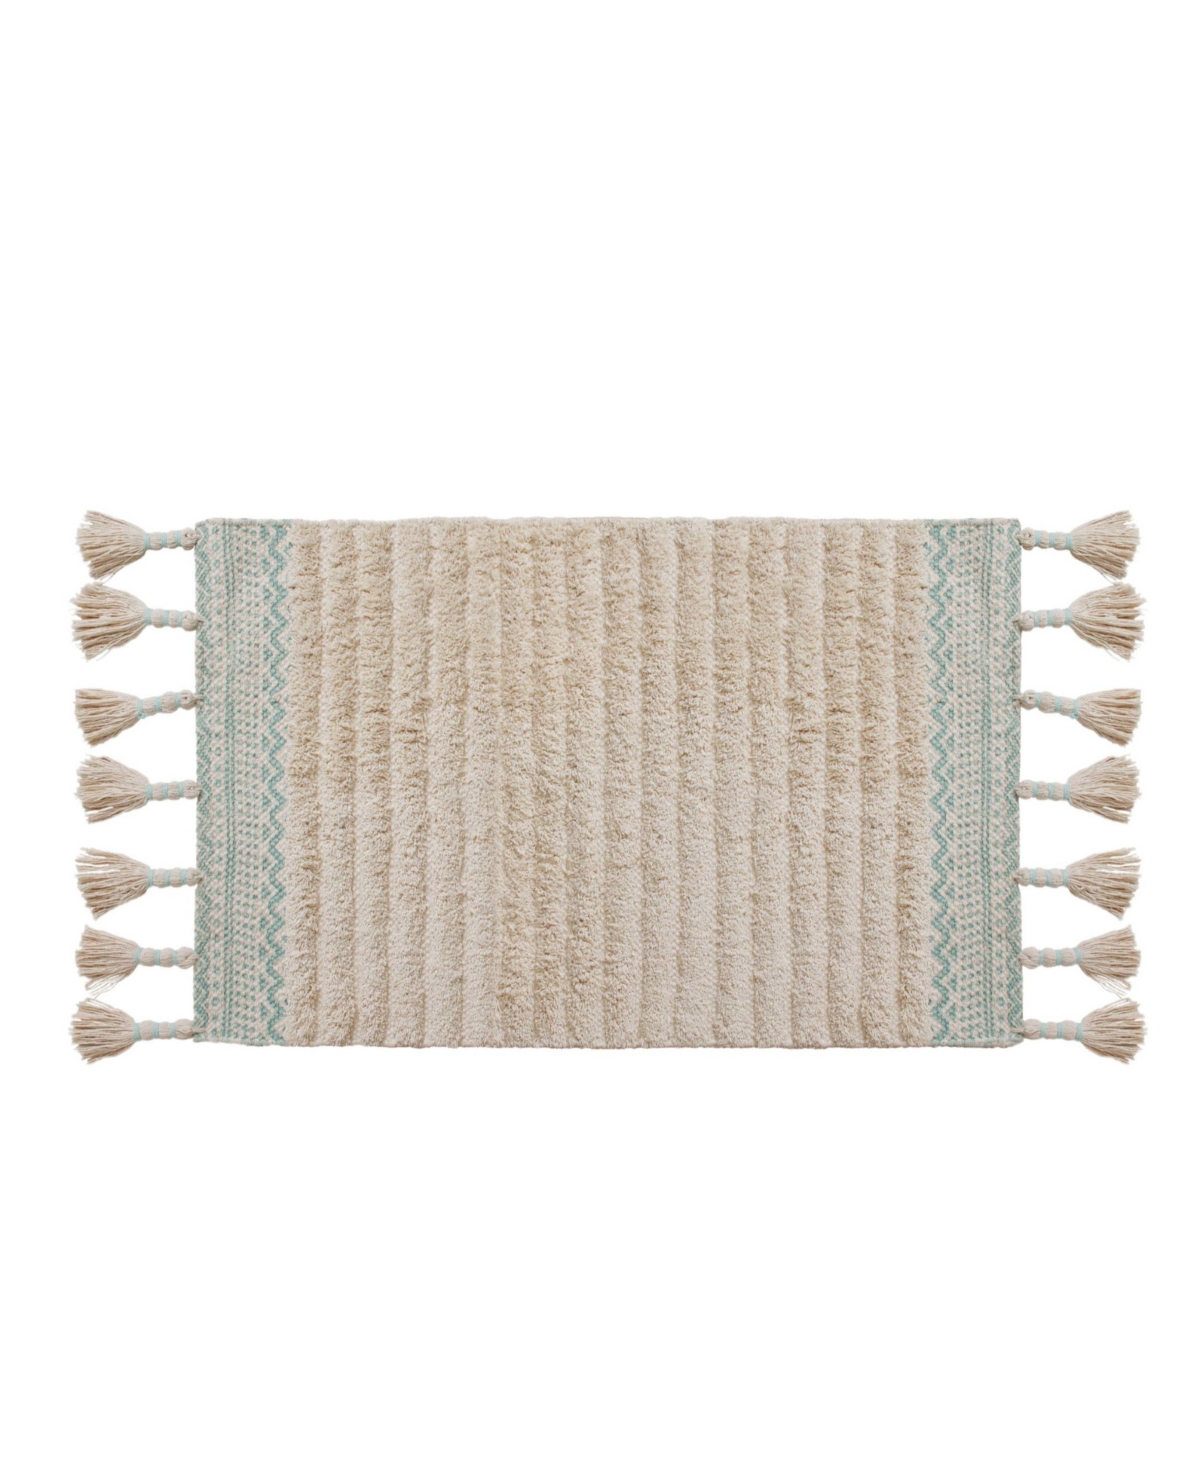 Lucky Brand Demian Overtufted Cotton Fringe Bath Rug, 17" X 32" Bedding In Aqua